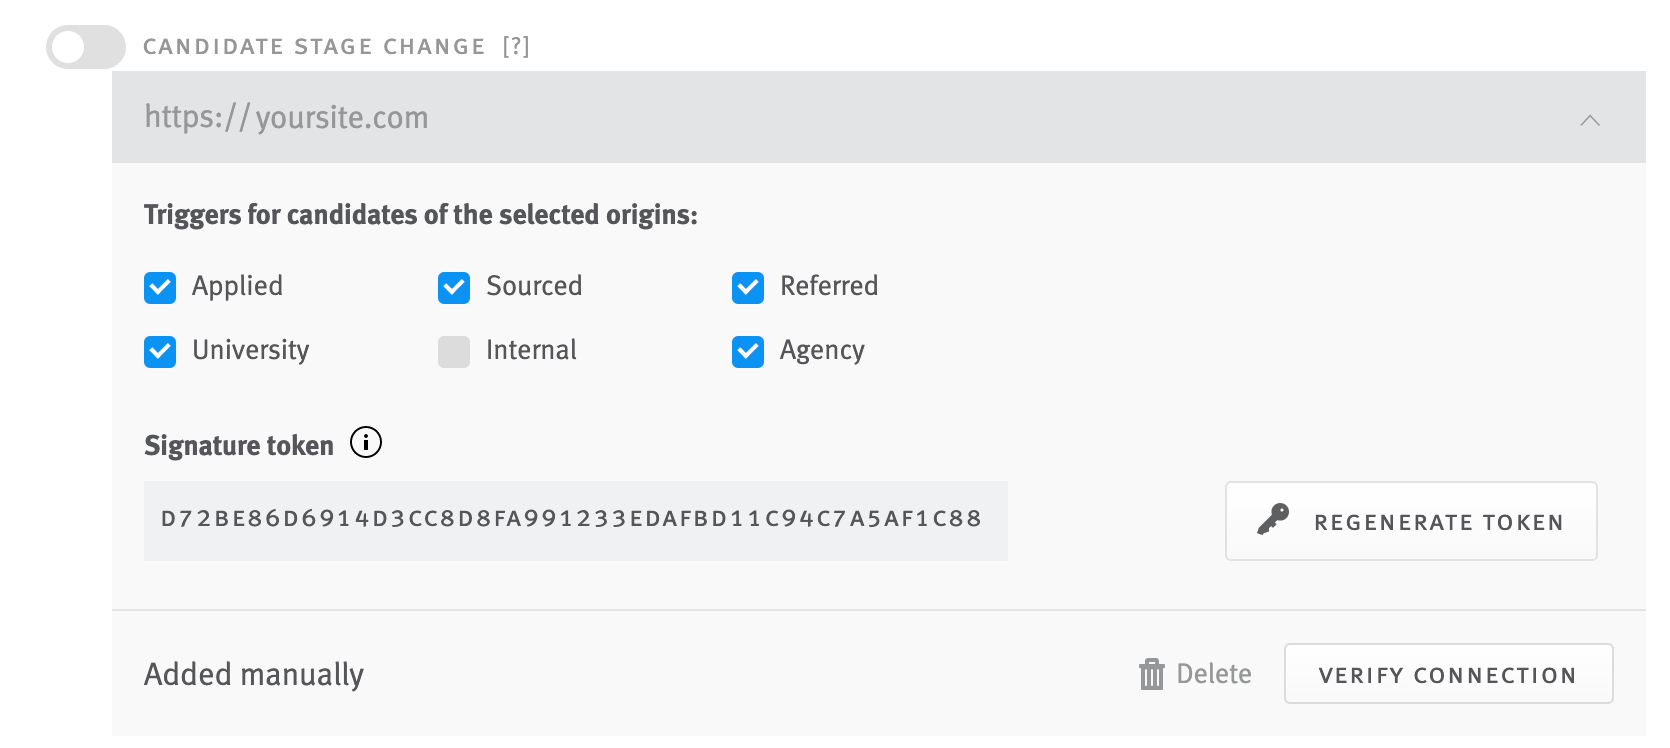 Candidate stage change webhook fields expanded; URL field is empty event toggle is inactive